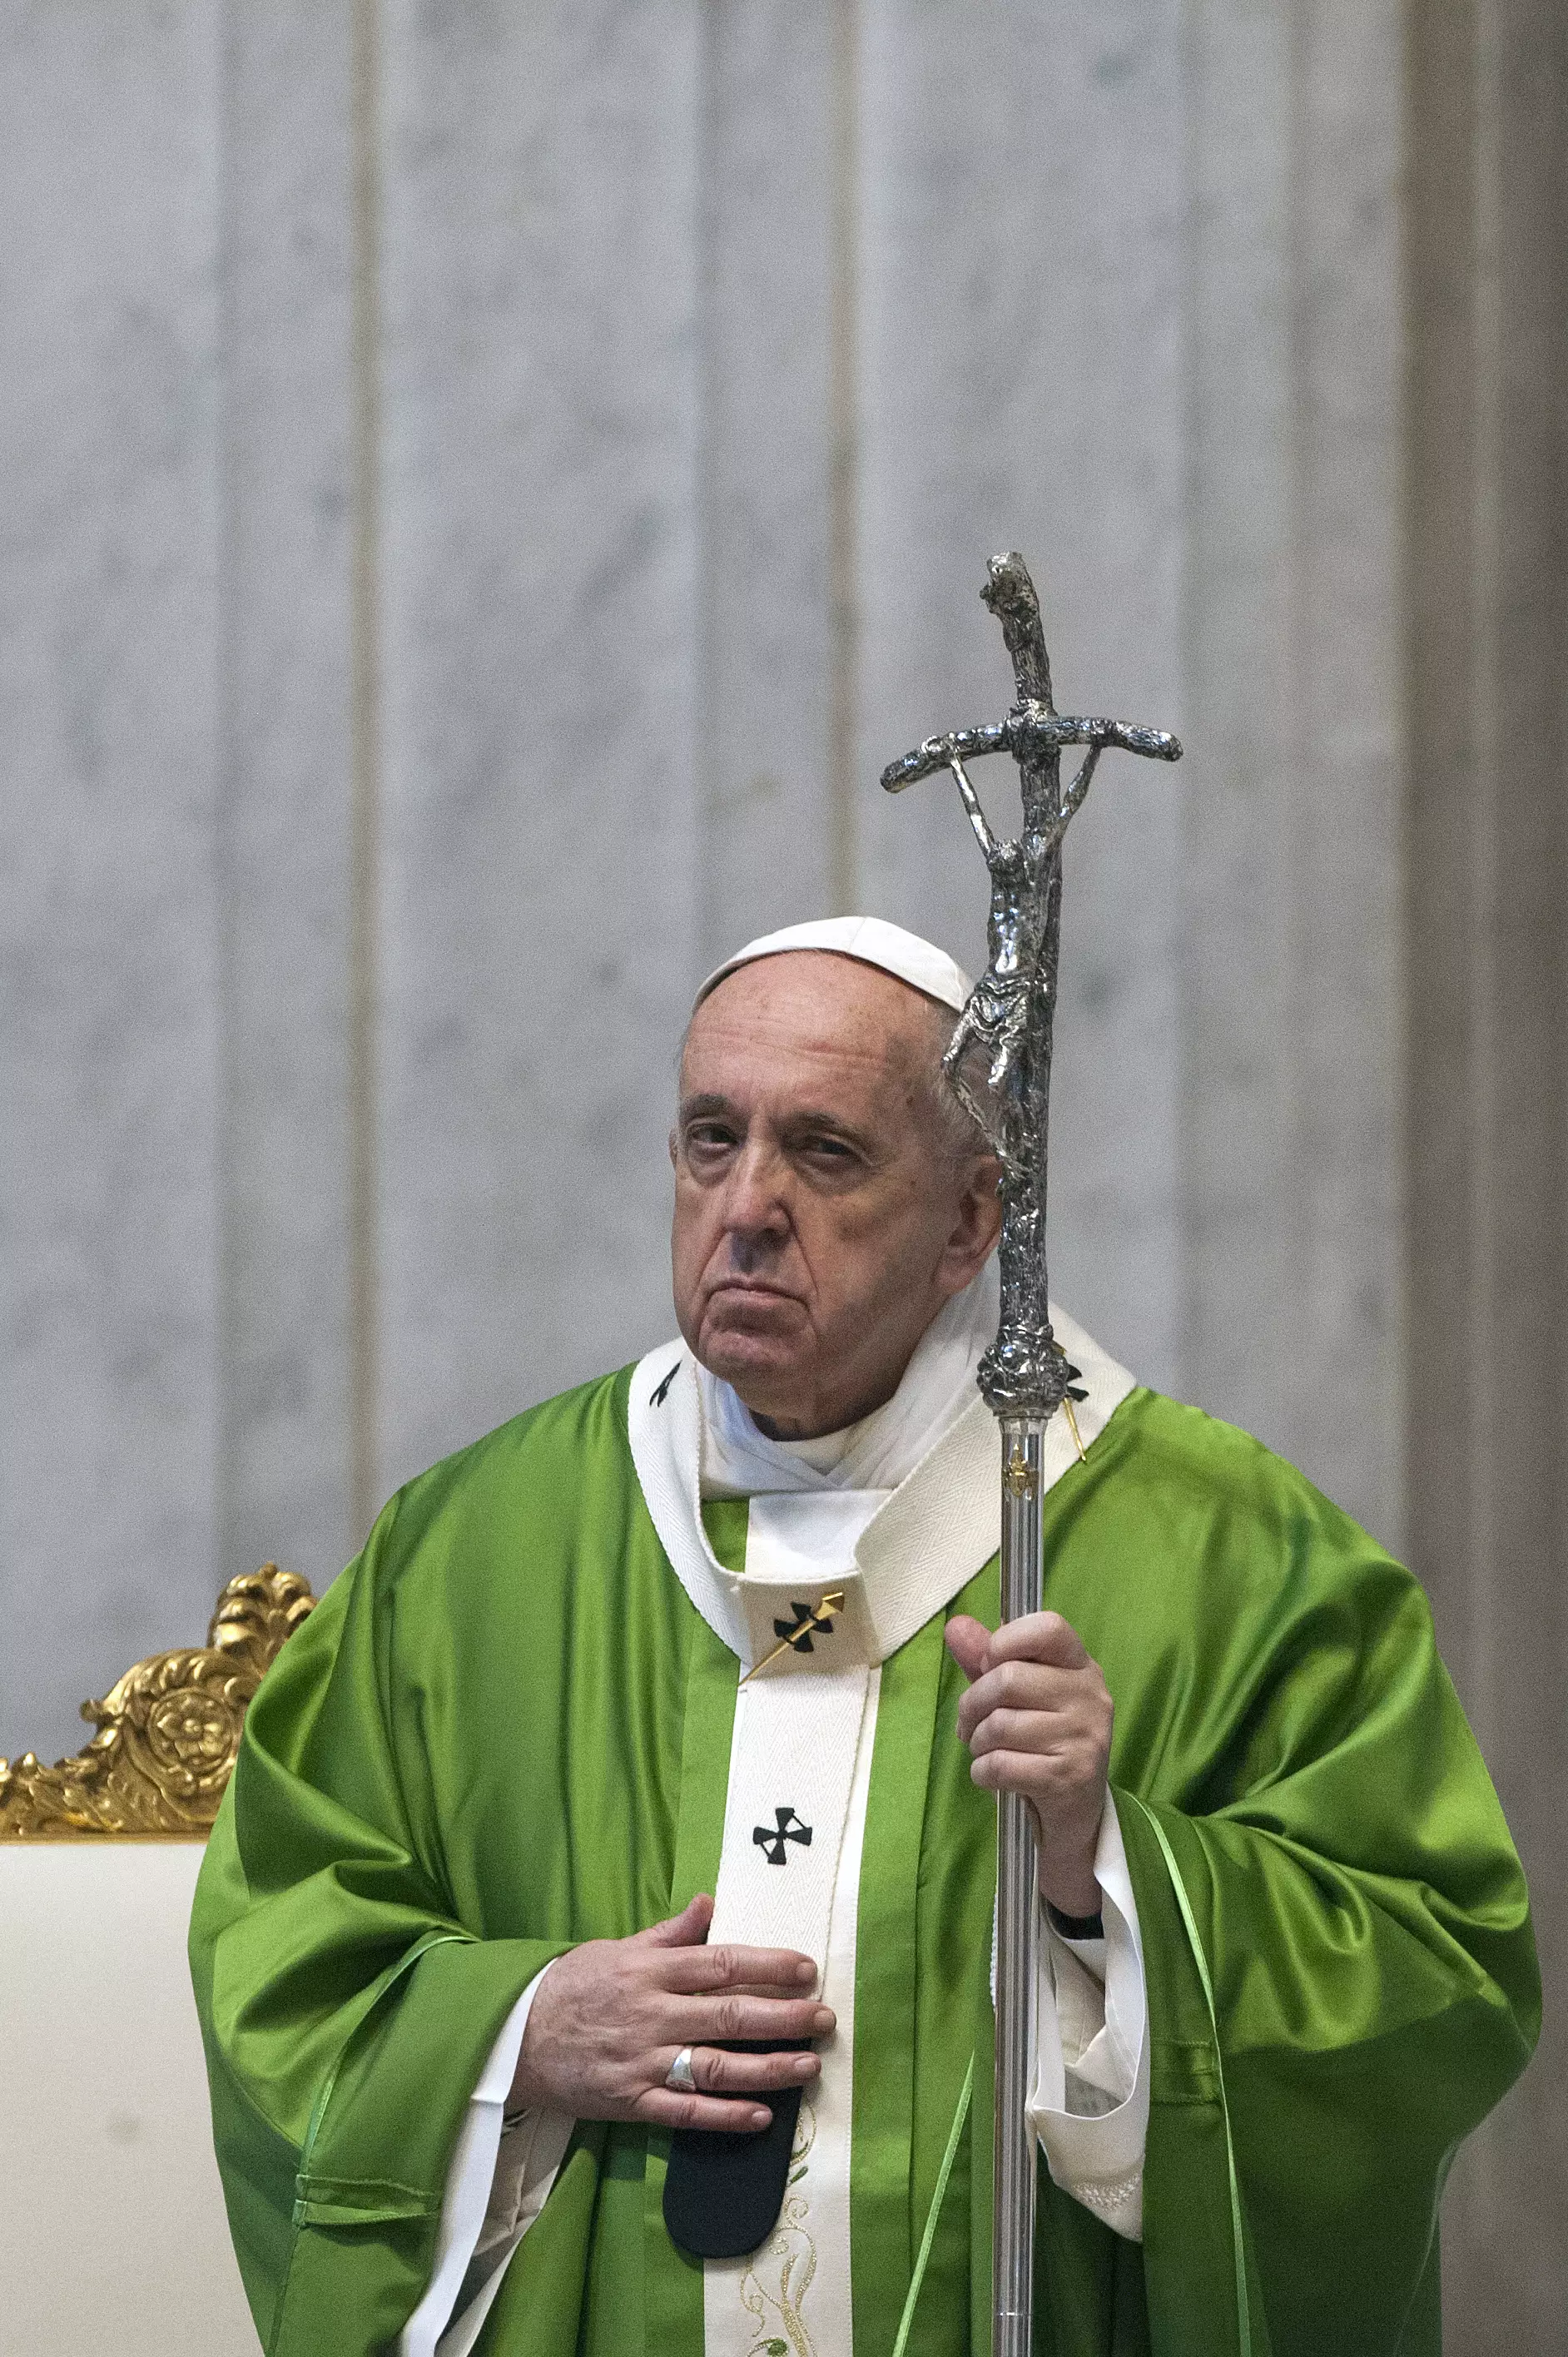 An investigation has reportedly been launched into activity on the Pope's Instagram account.